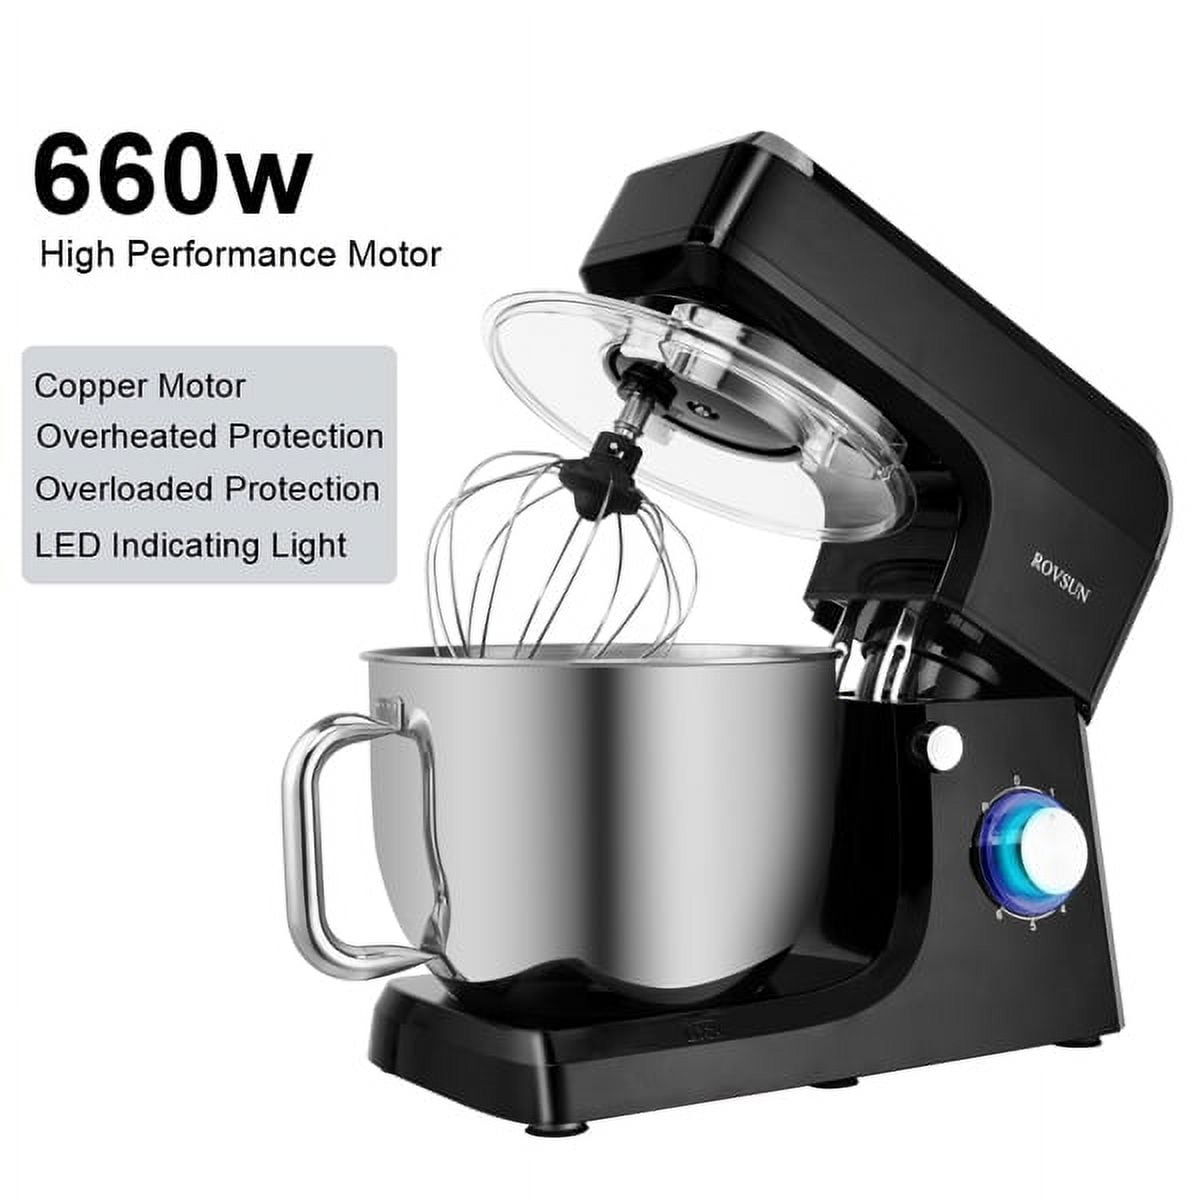 Stand Mixer, POWWA 7.5 qt Electric Mixer, 6+P Speed 660W Household Tilt-Head Kitchen Food Mixers with Whisk, Dough Hook, Mixing Beater & Splash Guard